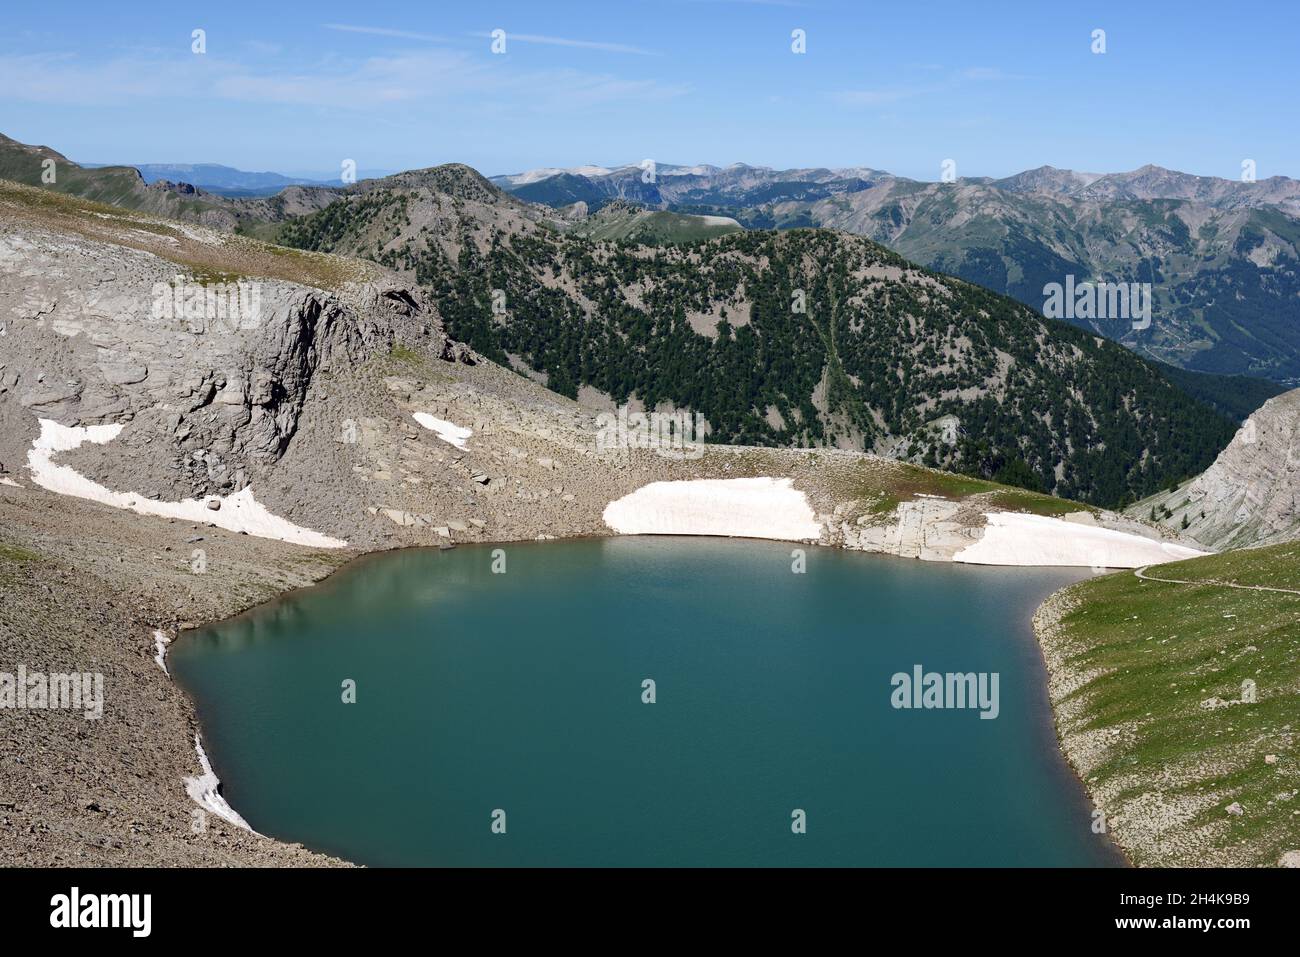 Lake or Lac de la Petite Cayolle in the Mercantour National Park French Alps France Stock Photo